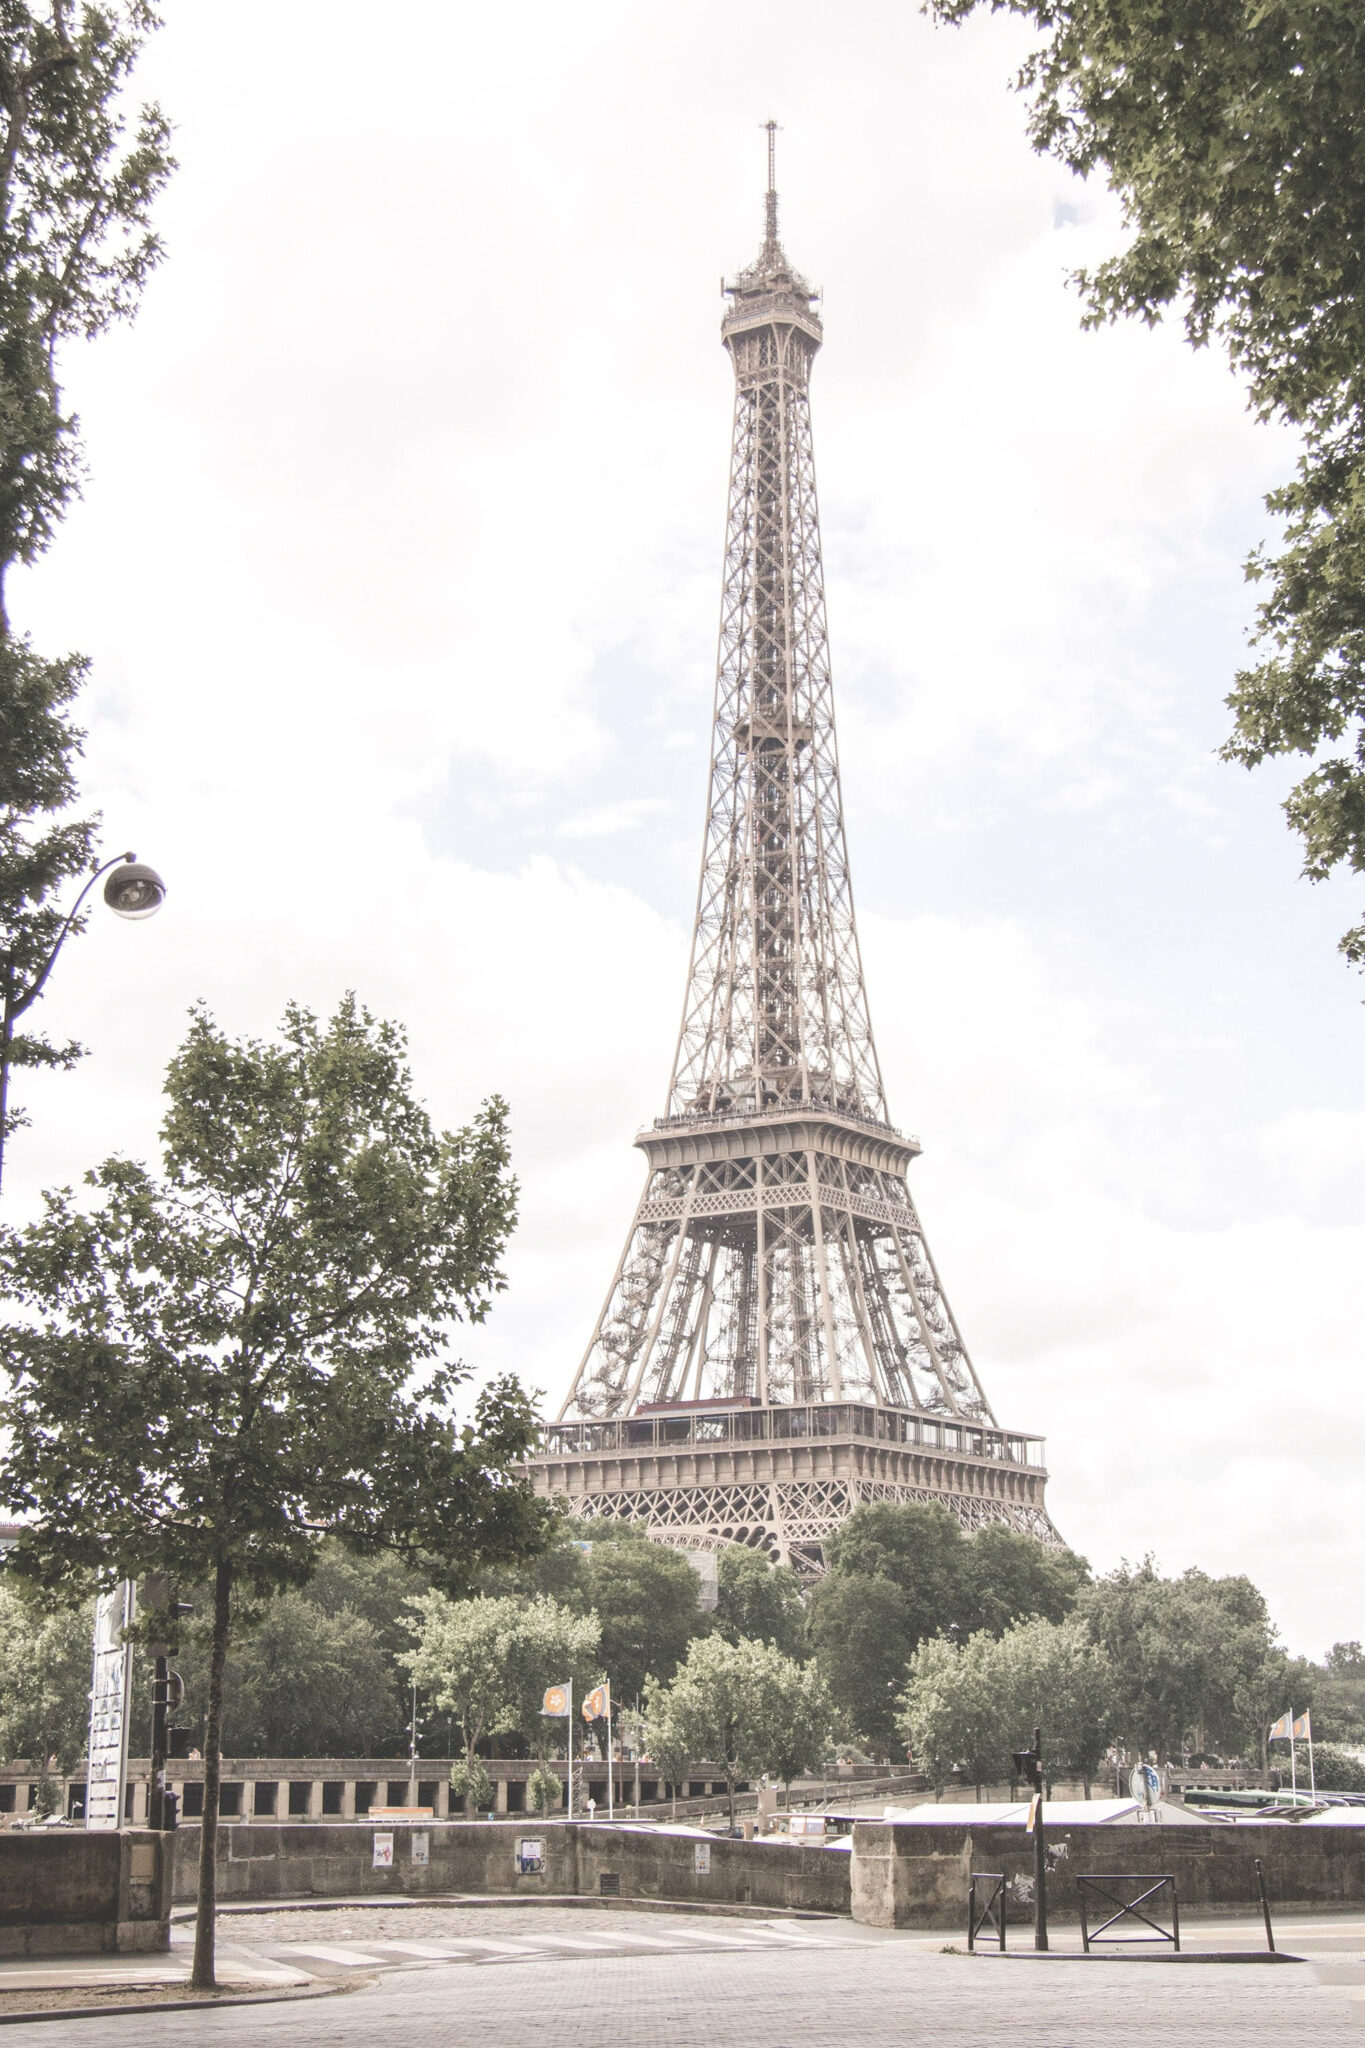 The Eiffel Tower in full view. This article covers how to move abroad with no job or money.